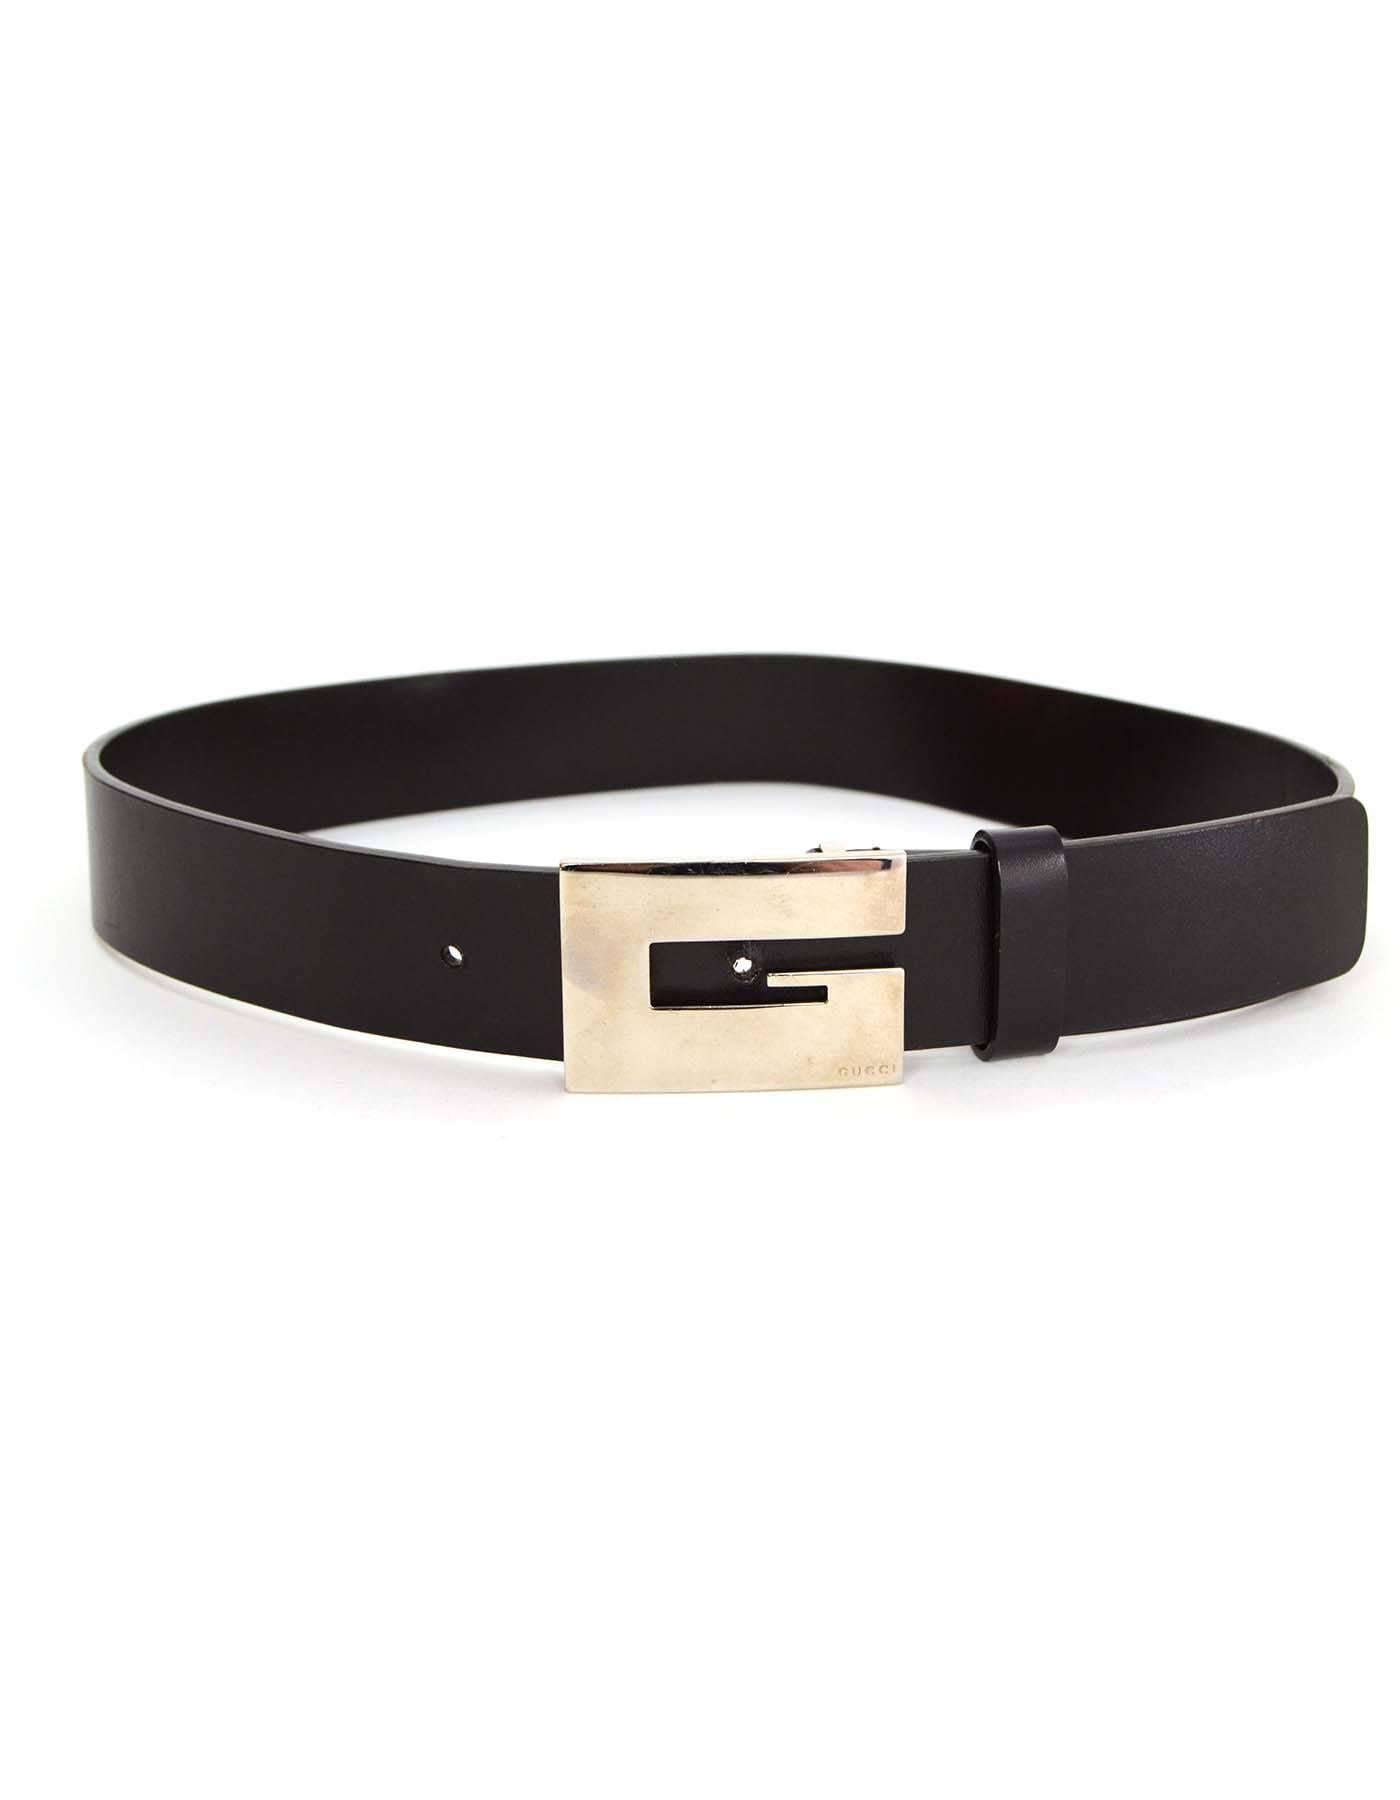 Gucci Black Leather Belt sz 36 SHW 
Features engraved Gucci on the 'G' silver hardware buckle

Made In: Italy
Color: Black
Hardware: Silvertone
Materials: Leather and metal
Closure/Opening: Buckle and notch closure
Stamp: